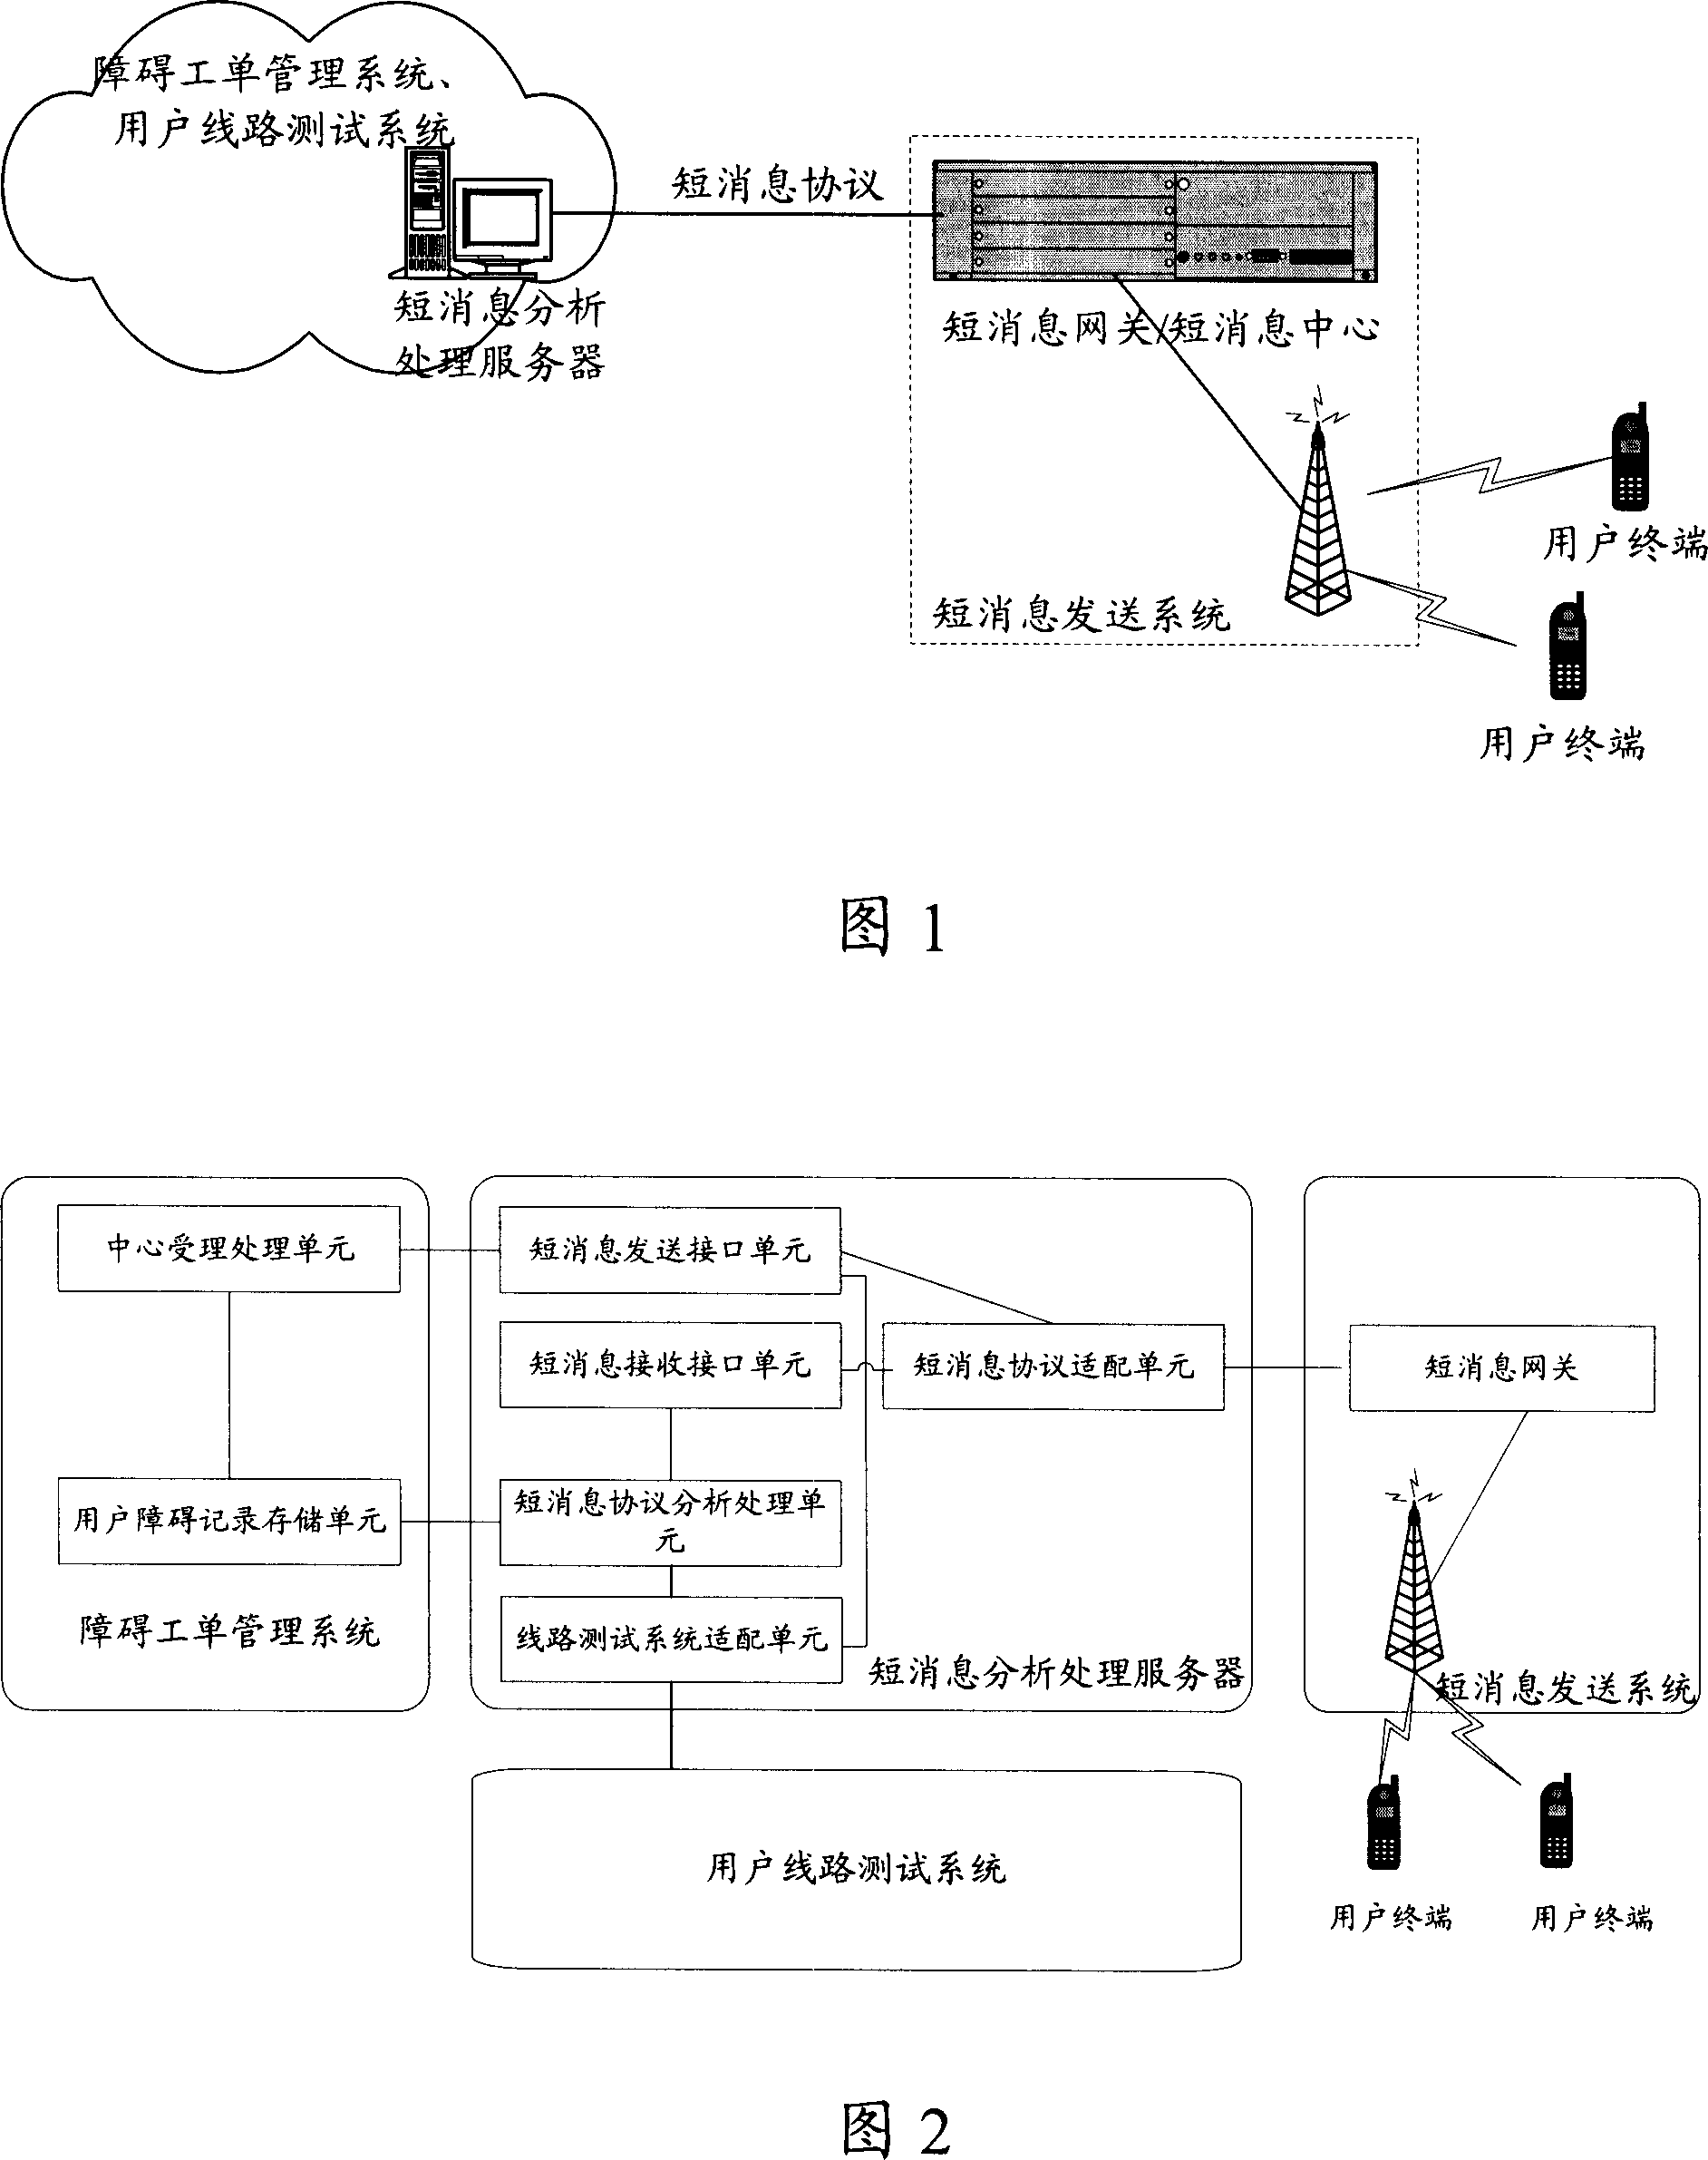 Processing system for user's line fault and processing method for user's line fault